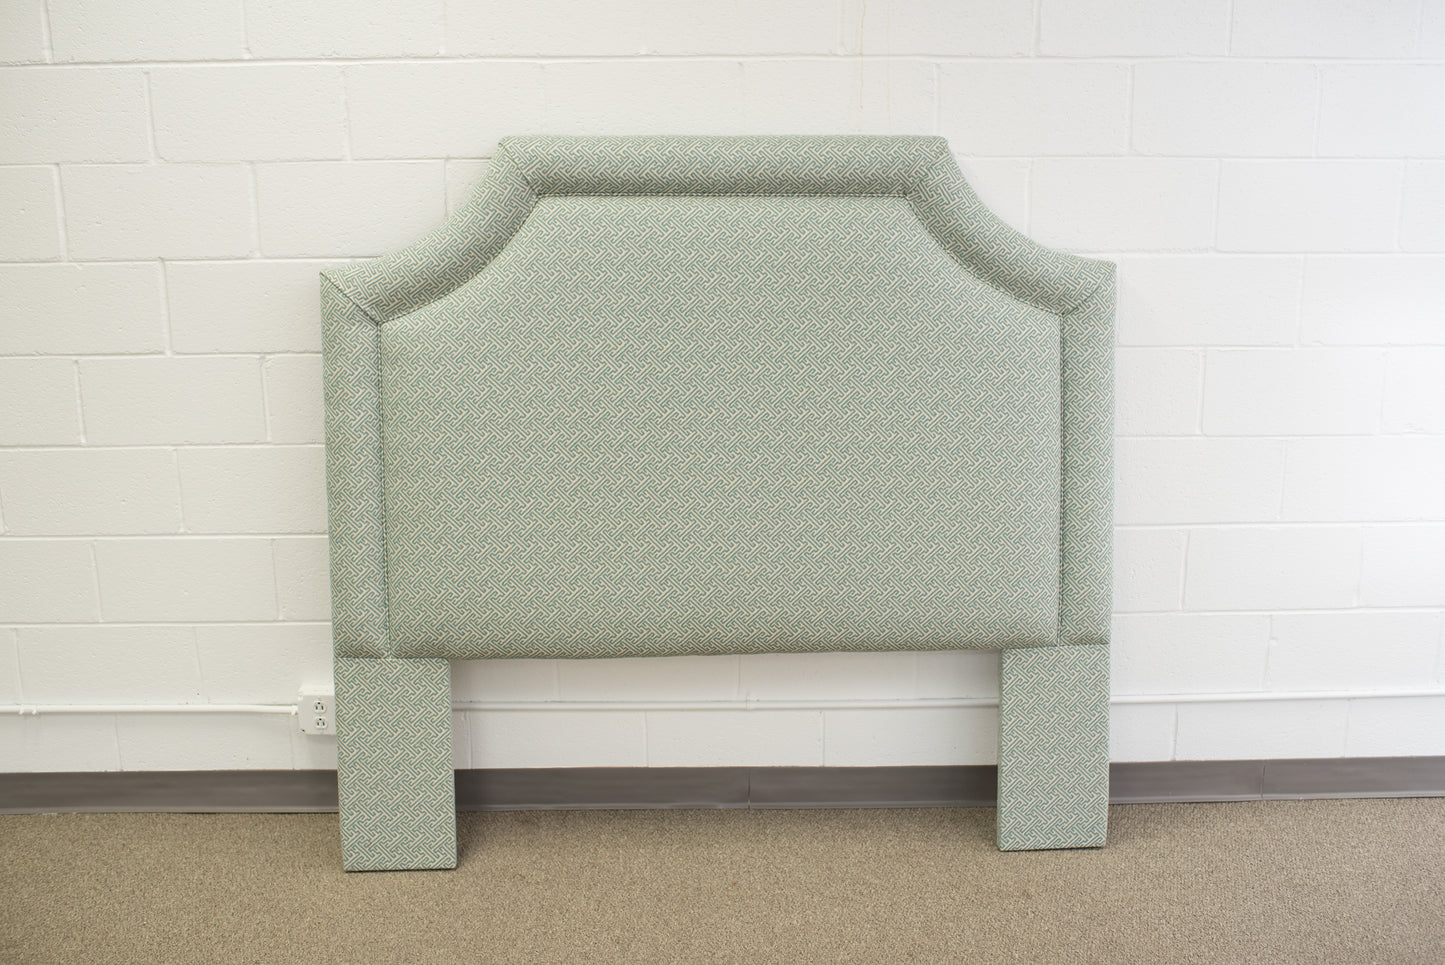 Queen upholstered headboard in green and cream Kravet Fabric by Winston's Collection